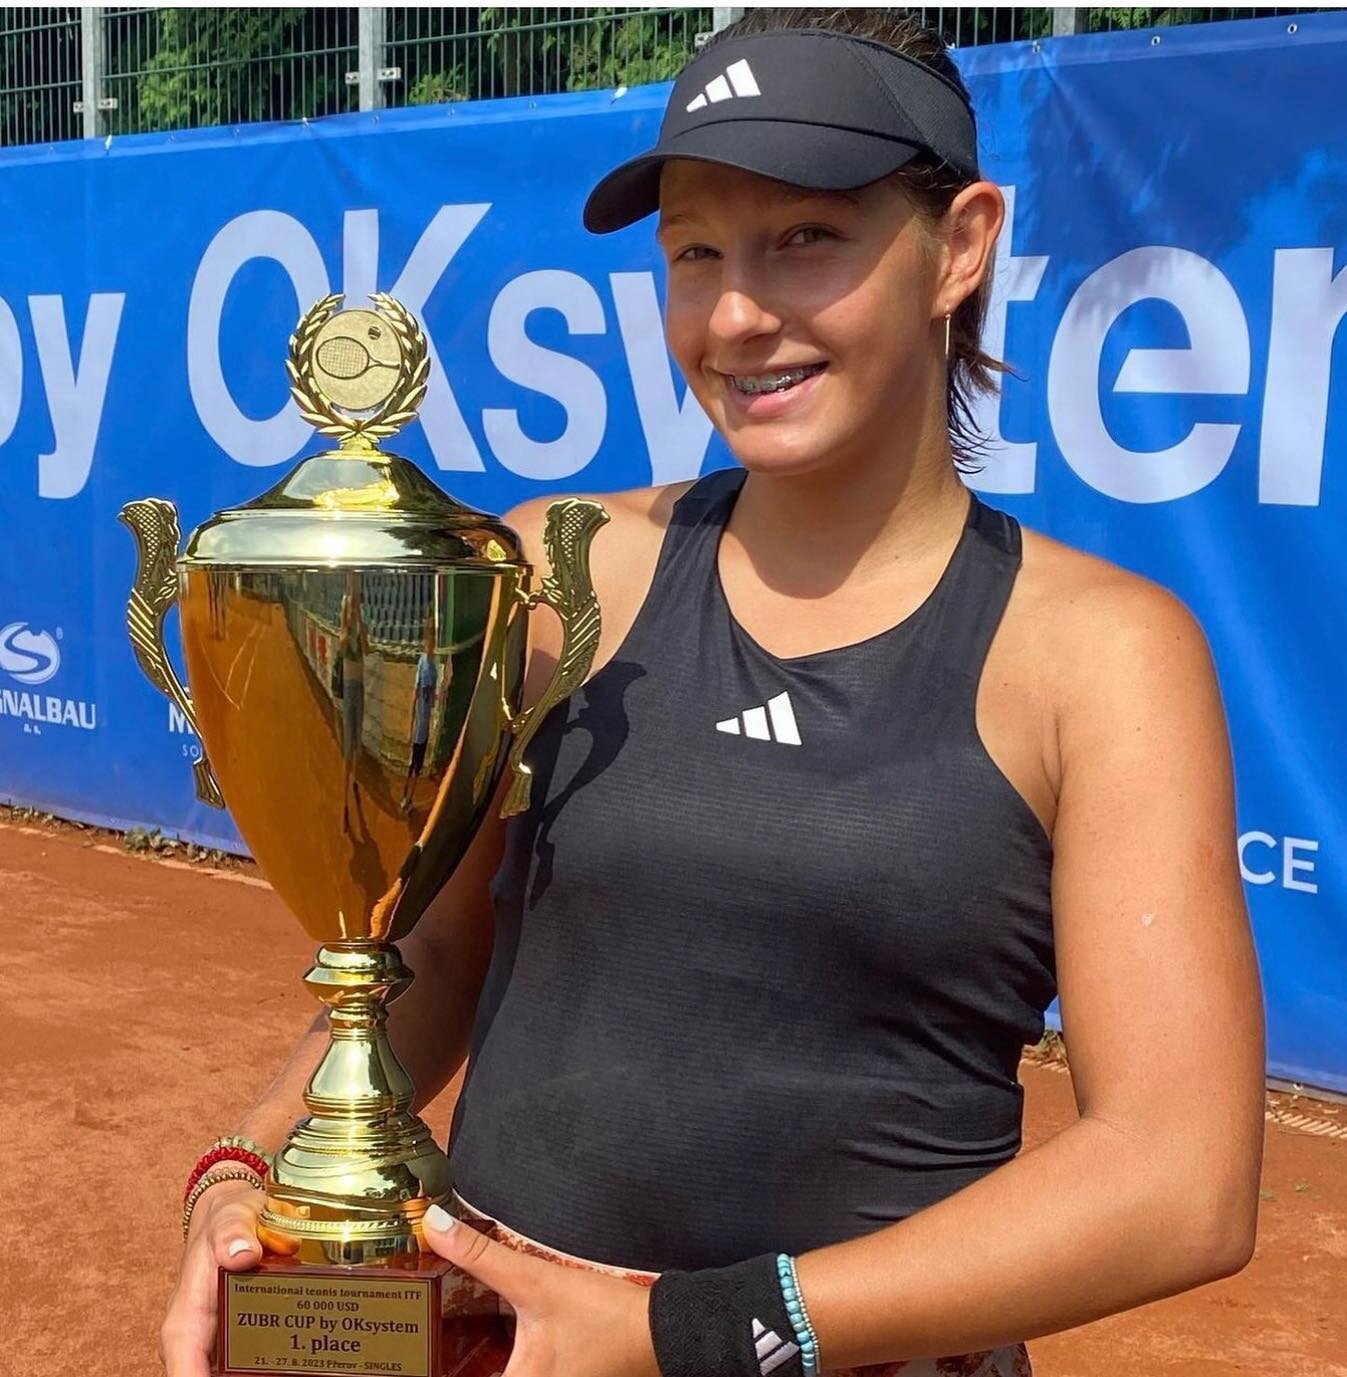 Huge congrats to @miariistic for winning the @itfworldtennistour $60k event in Prerov, Czech Rep this week. A great effort and signs of what is to come. 🏆🔥🎾

#Winning #MiaRistic #LittleBro #LittleCoach #Family #Team72 #AdidasTennis #YonexTennis